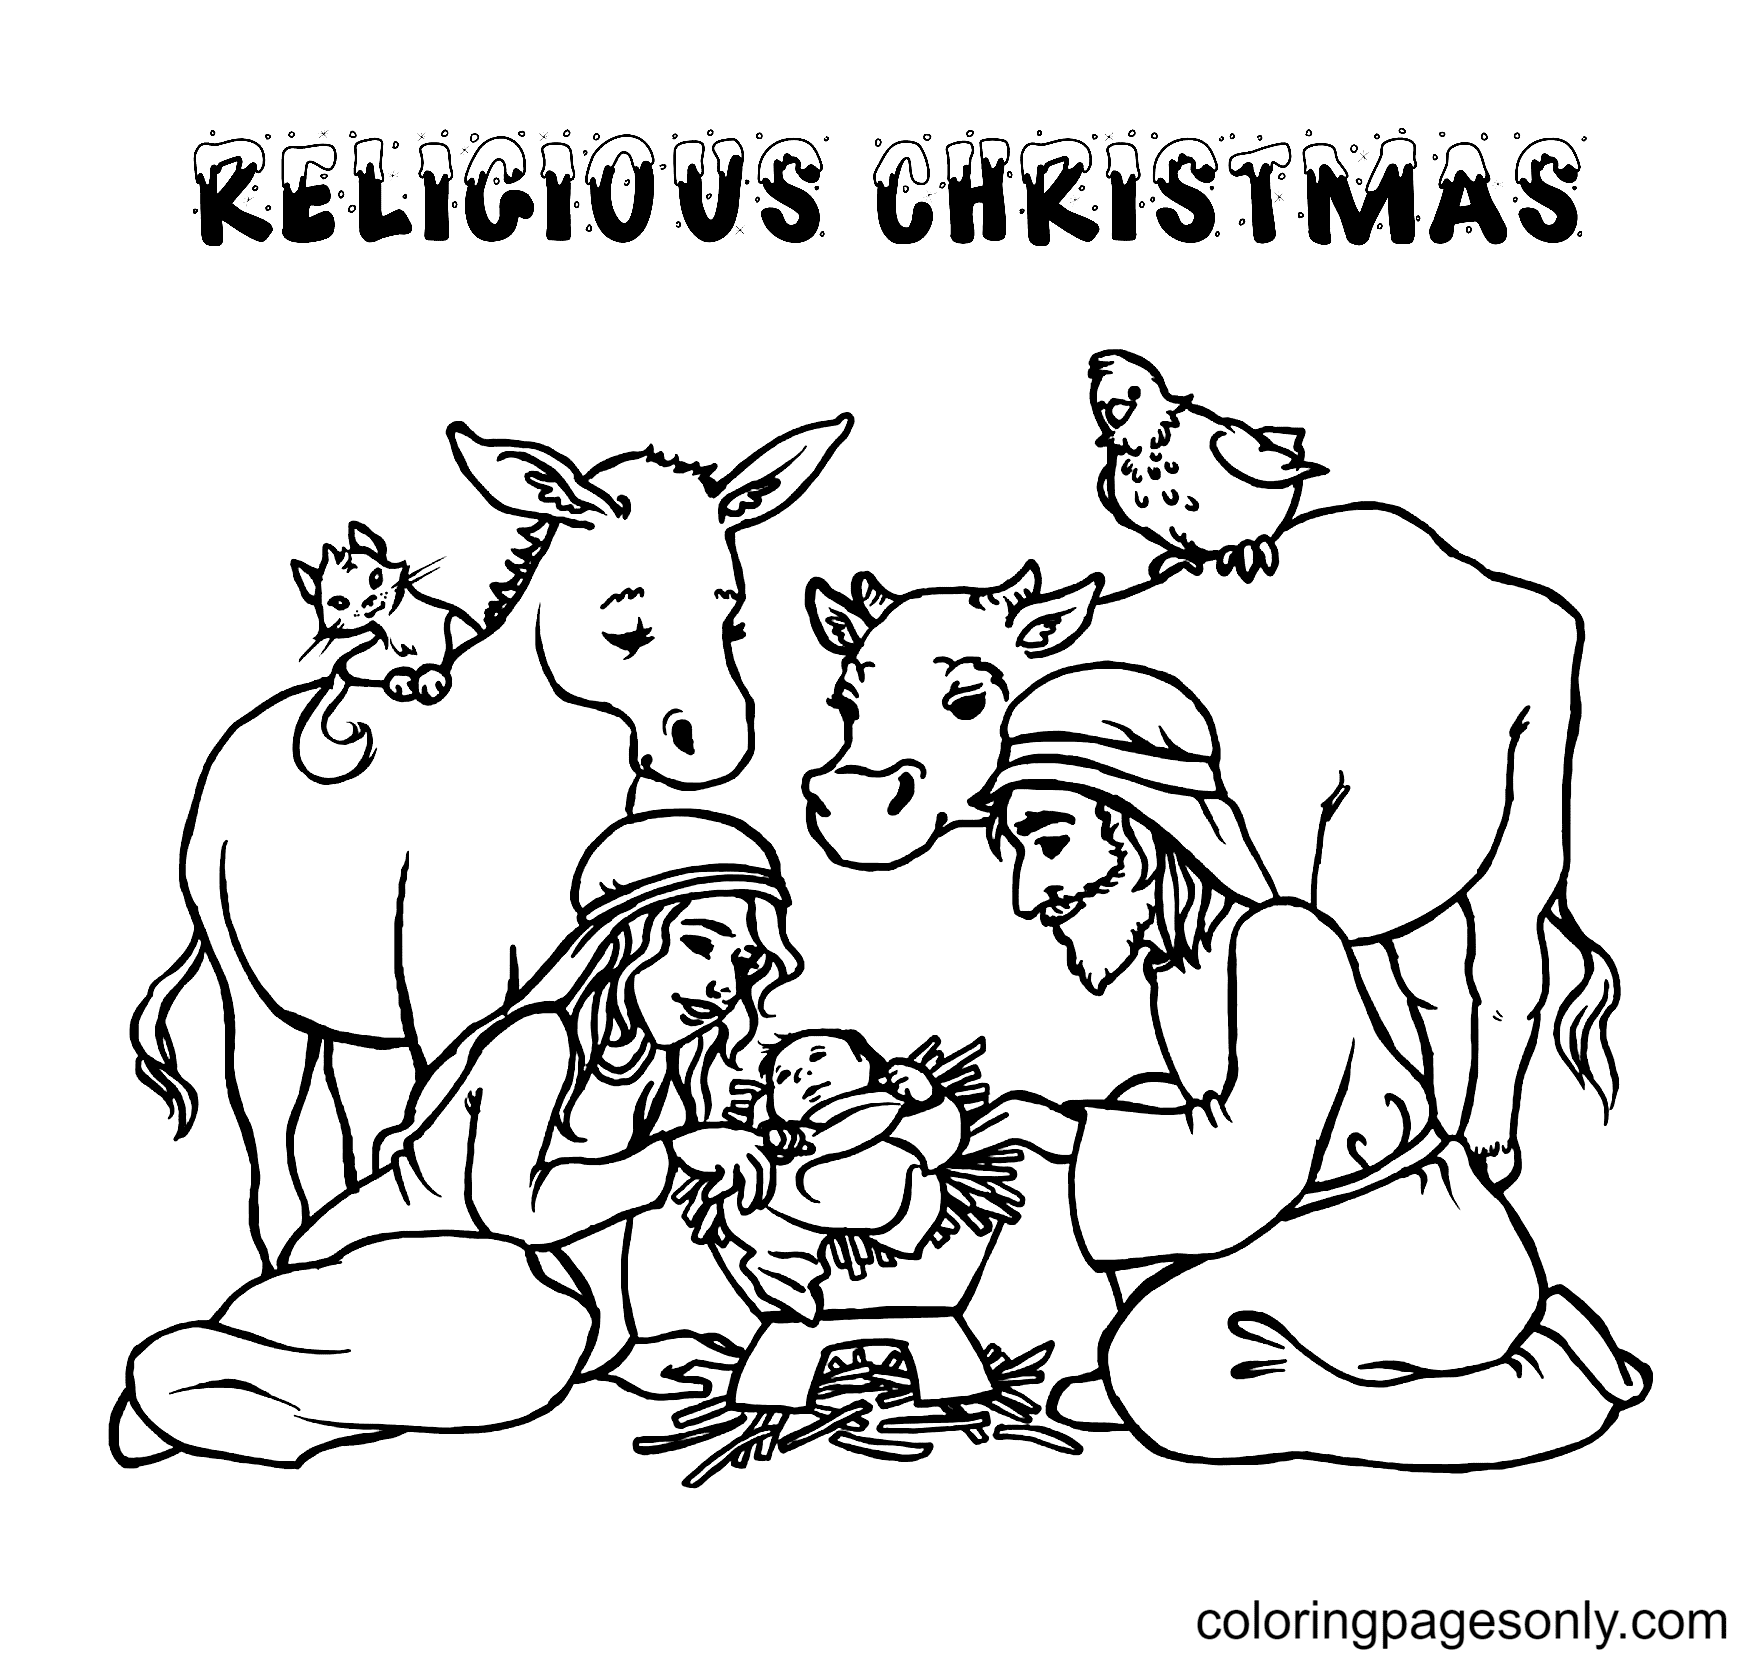 Religious Christmas Coloring Page